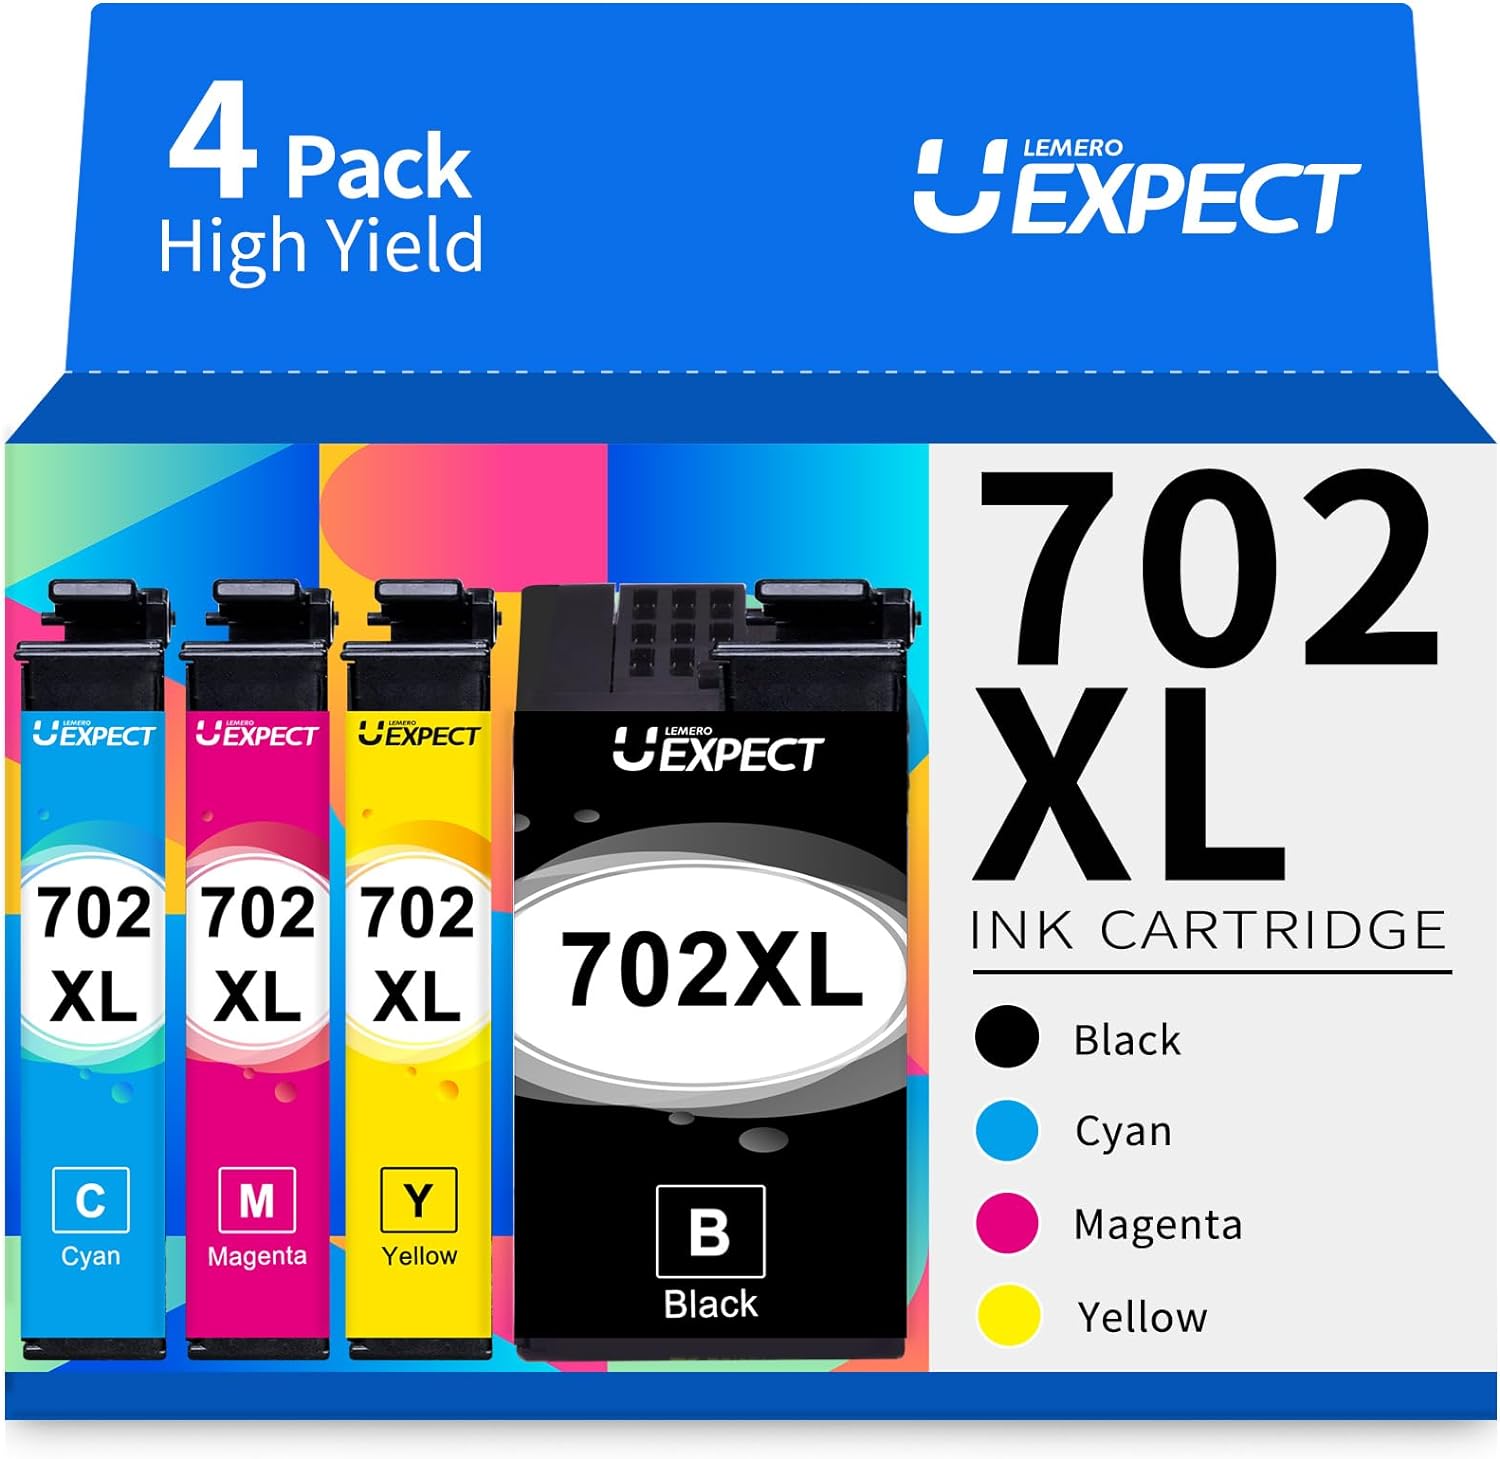 Replacement for Epson 702XL Combo Black/Cyan/Magenta/Yellow 4P